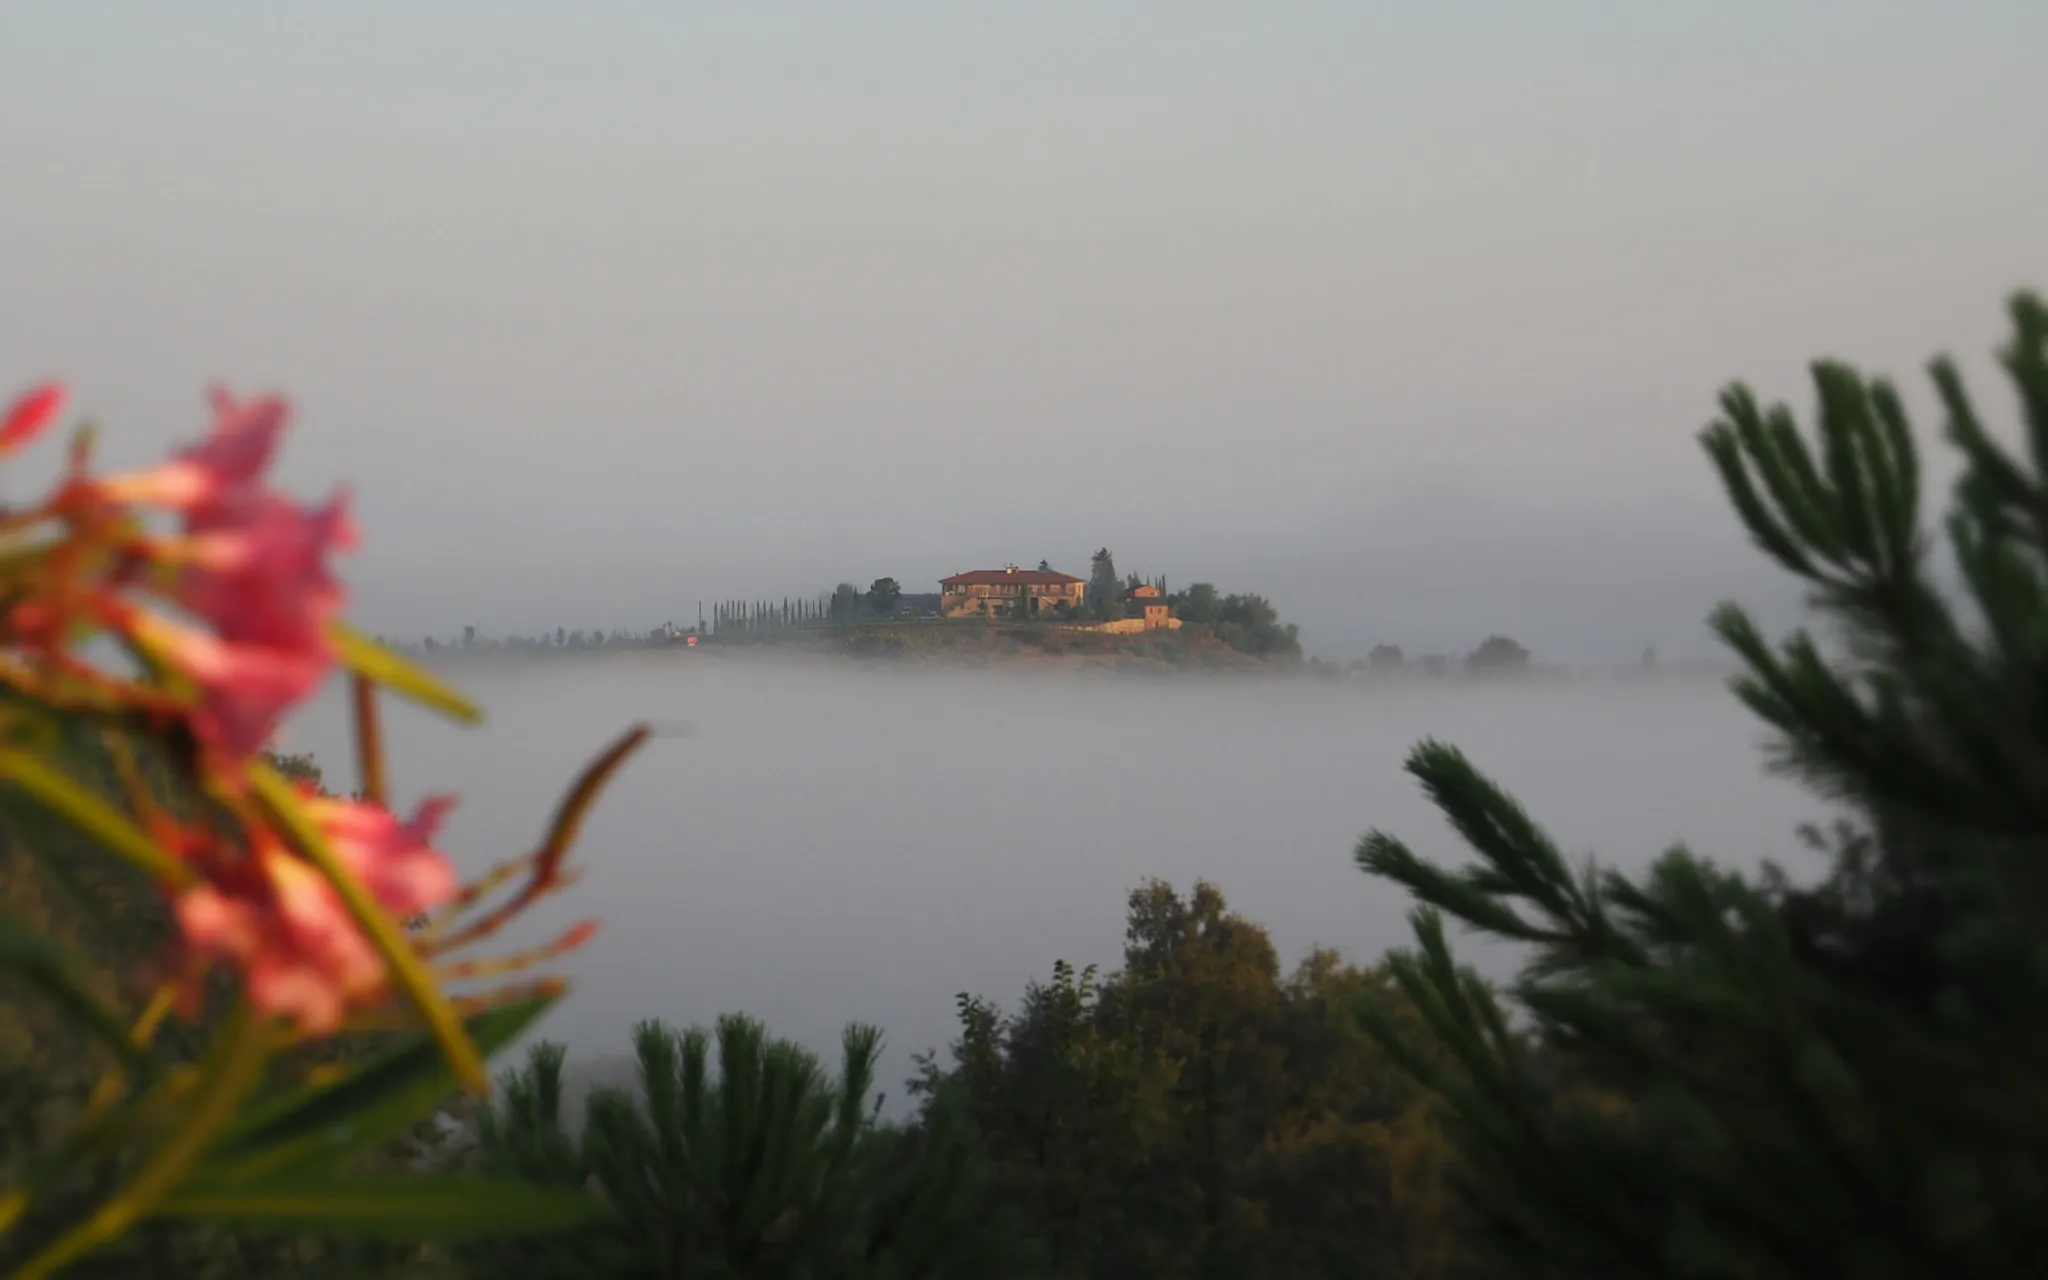 Photo showing: 500px provided description: A Finca/ Agriturismo in the middle of clouds in the near of Buonconvento, Tuscany, Italy [#Travel ,#Italy ,#Clouds ,#Tuscany ,#Island ,#Buonconvento ,#Lonely ,#Agriculture ,#Dream]